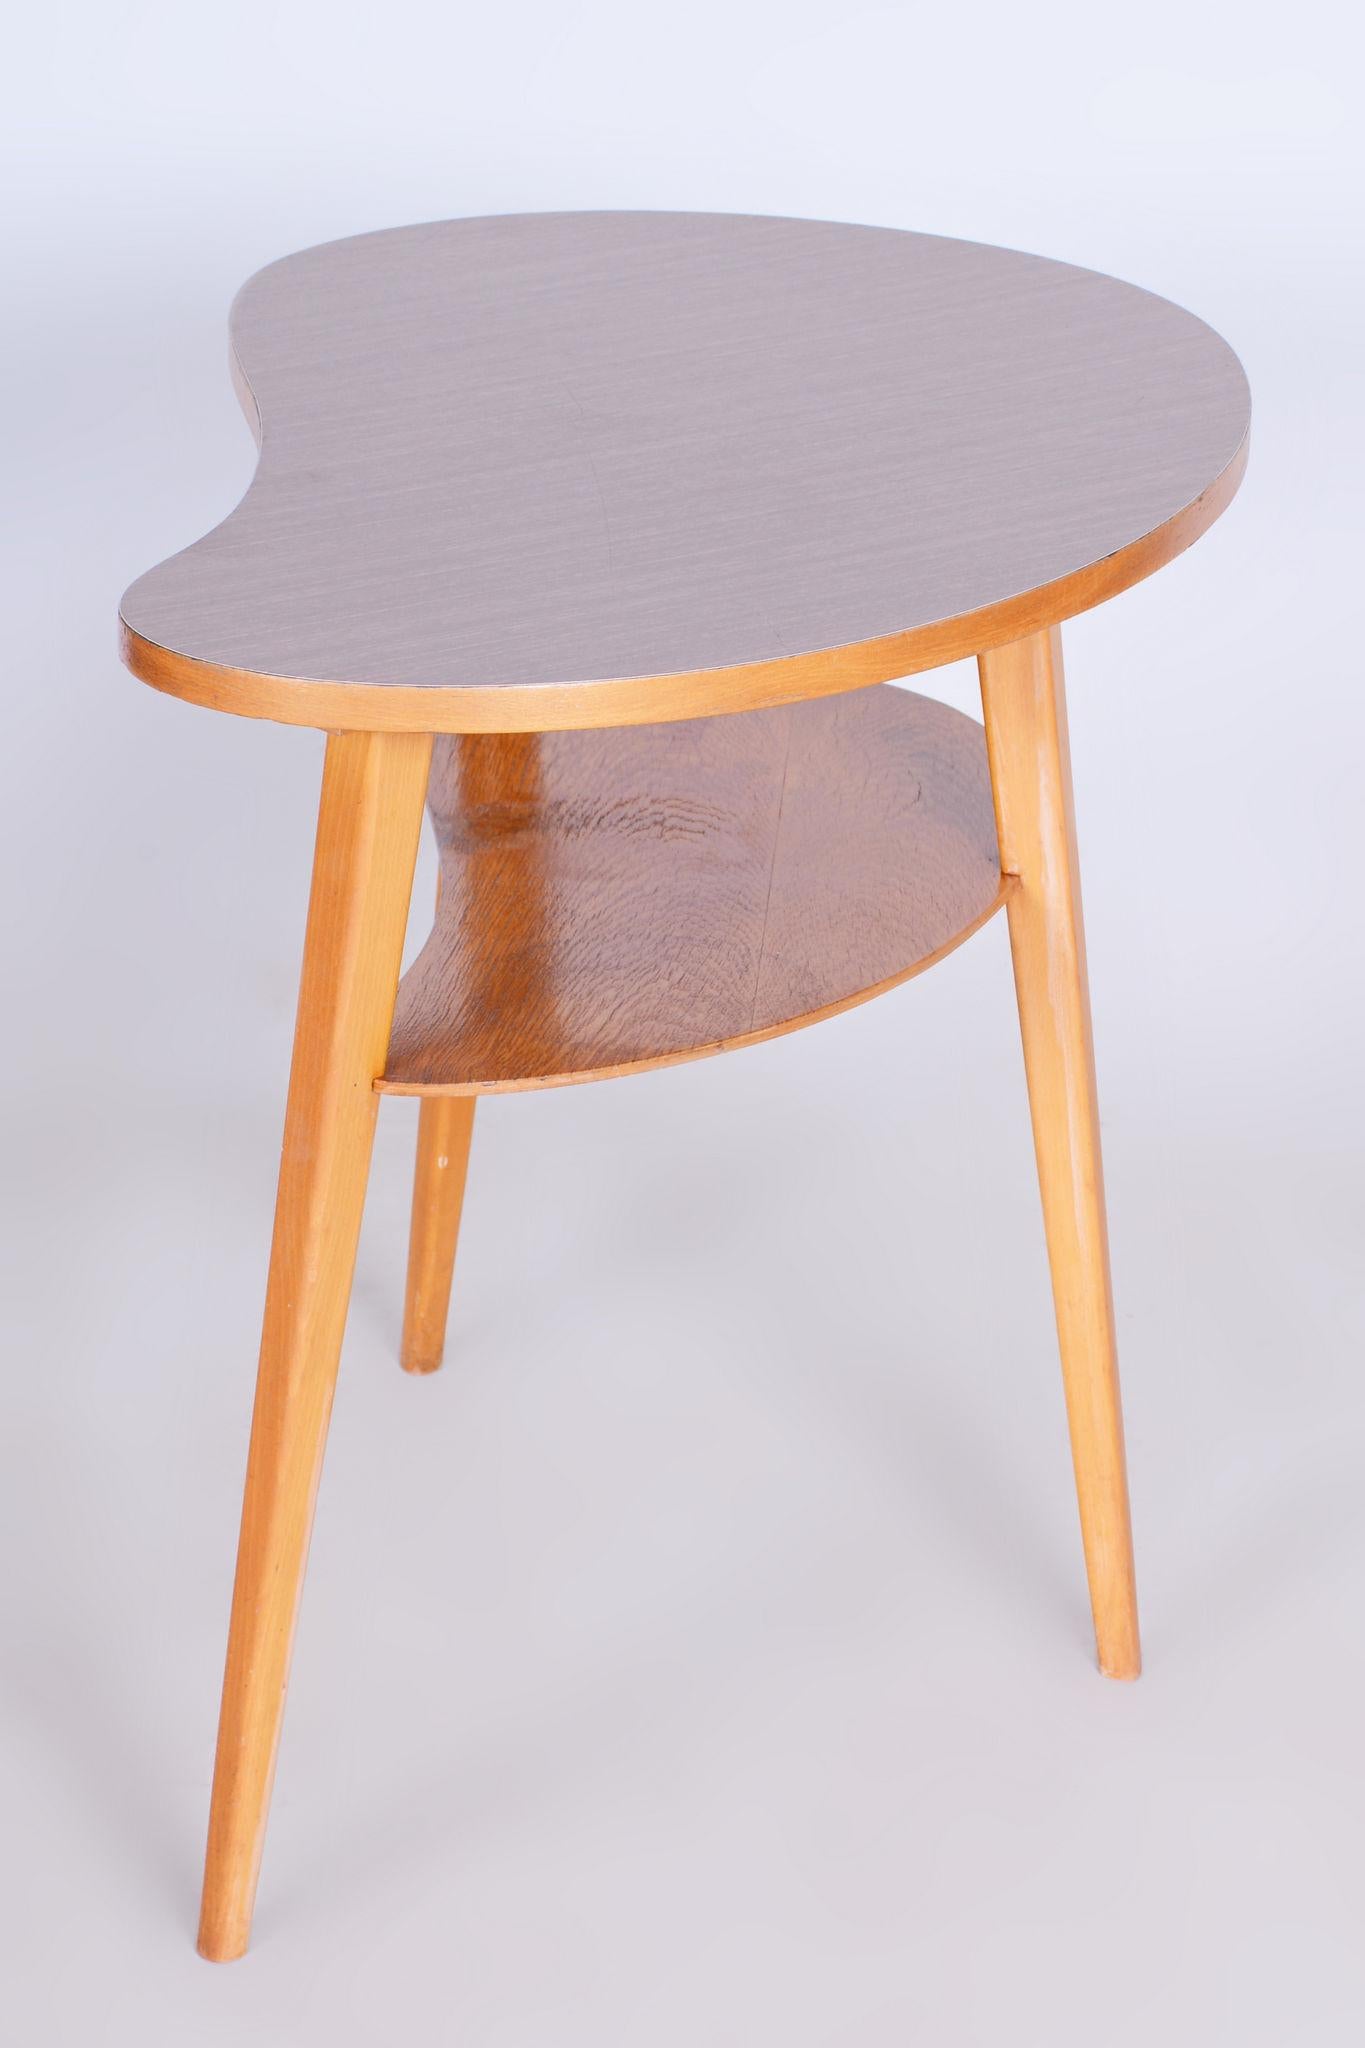 Wood Original Beech MidCentury Small Table, Well Preserved Condition, Czechia, 1950s For Sale